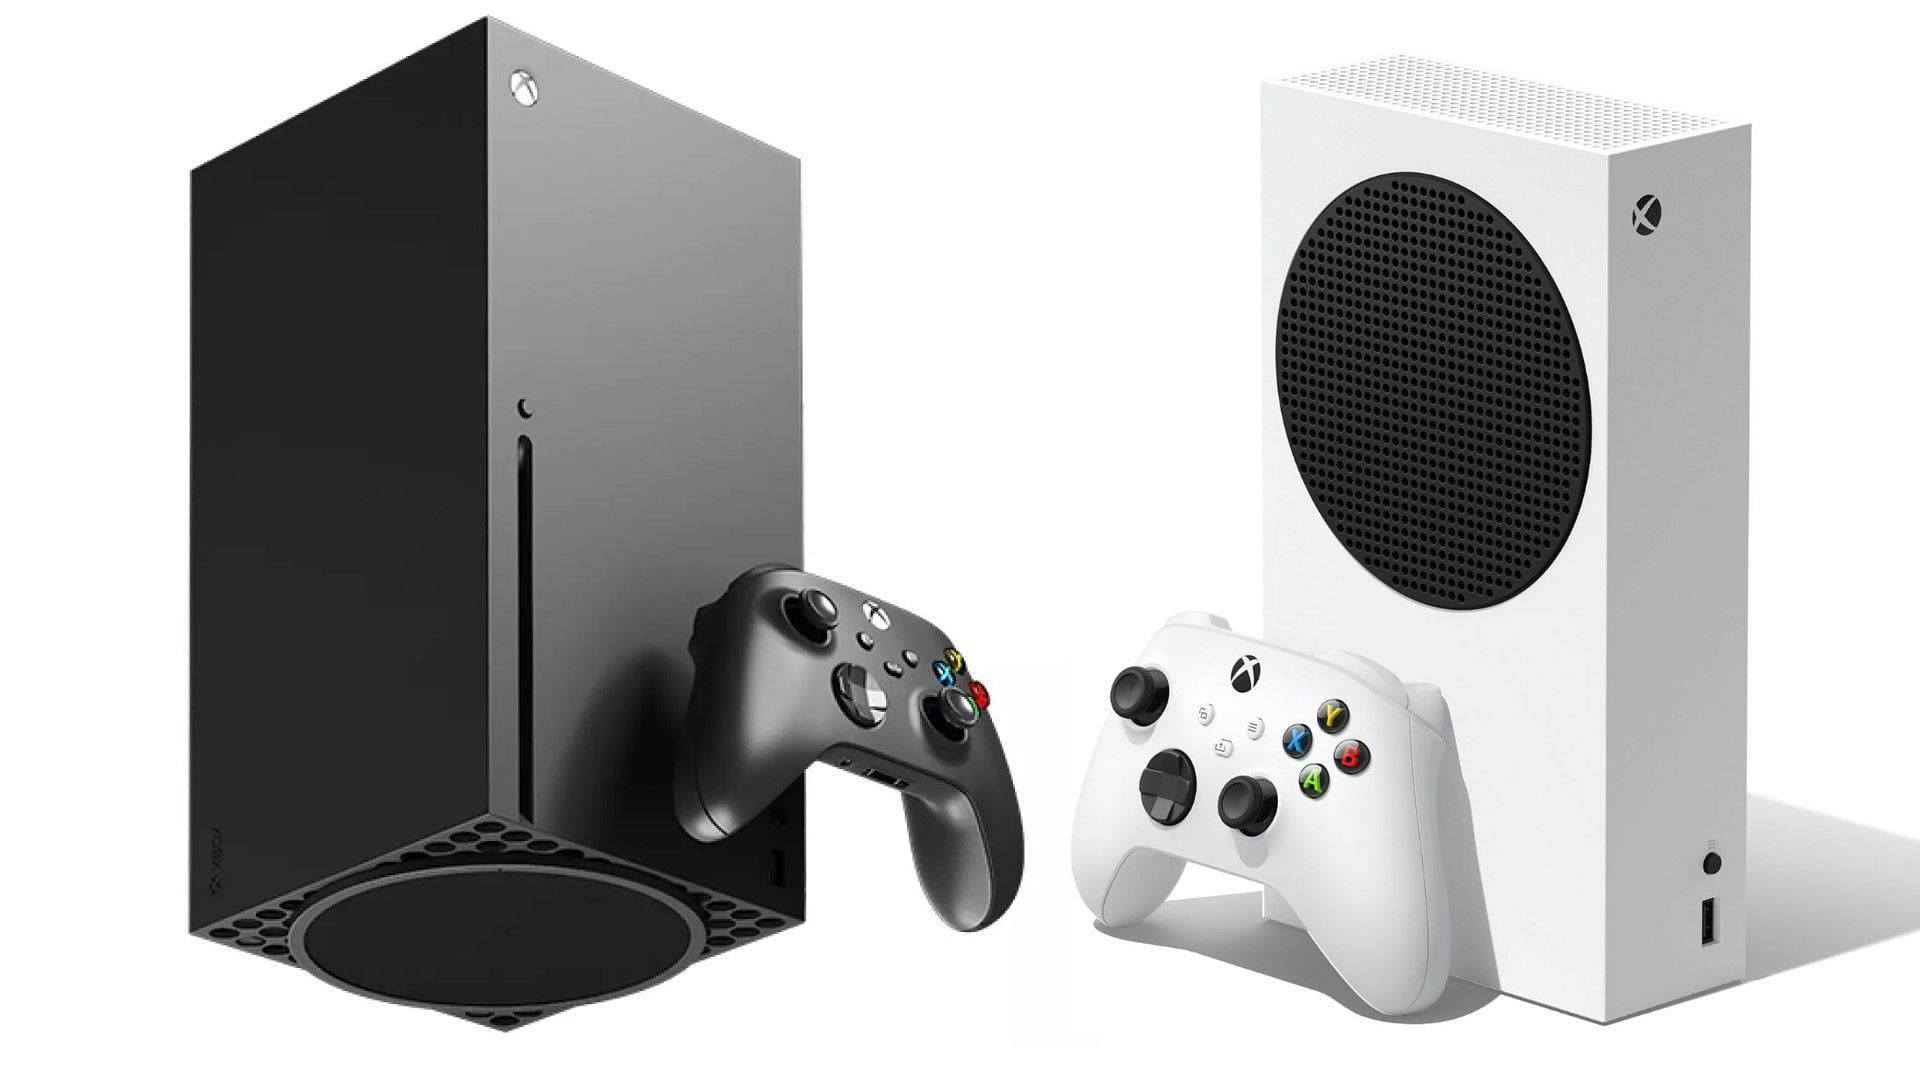 The all-white Xbox Series X will replace the current all-black version (Image via Best Buy, Gamestop)